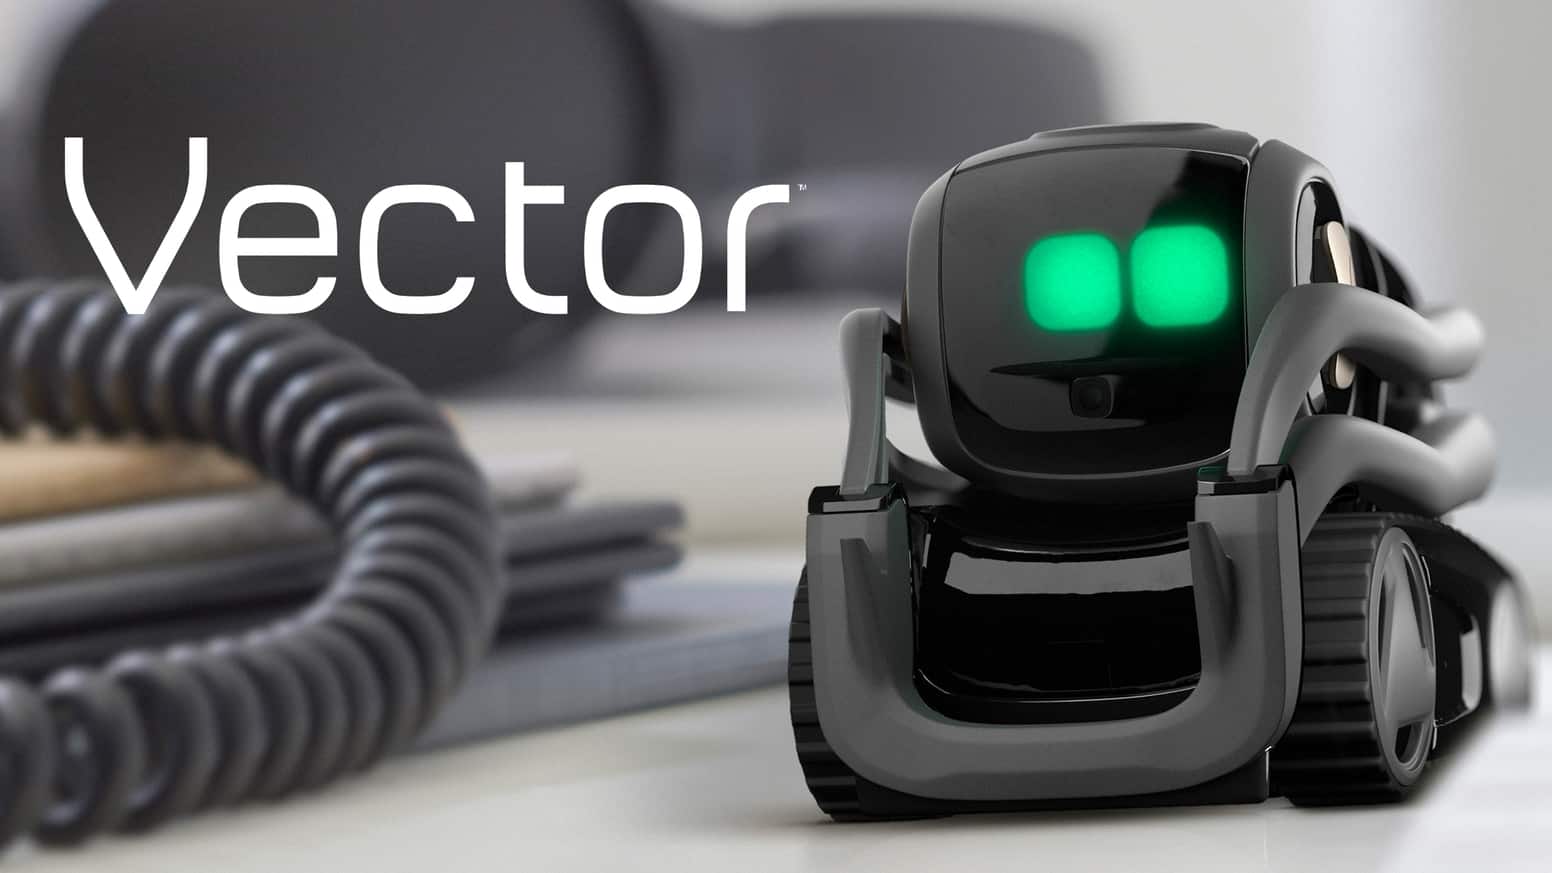 You are currently viewing Anki’s Vector-The Best Household Robot With Wheels